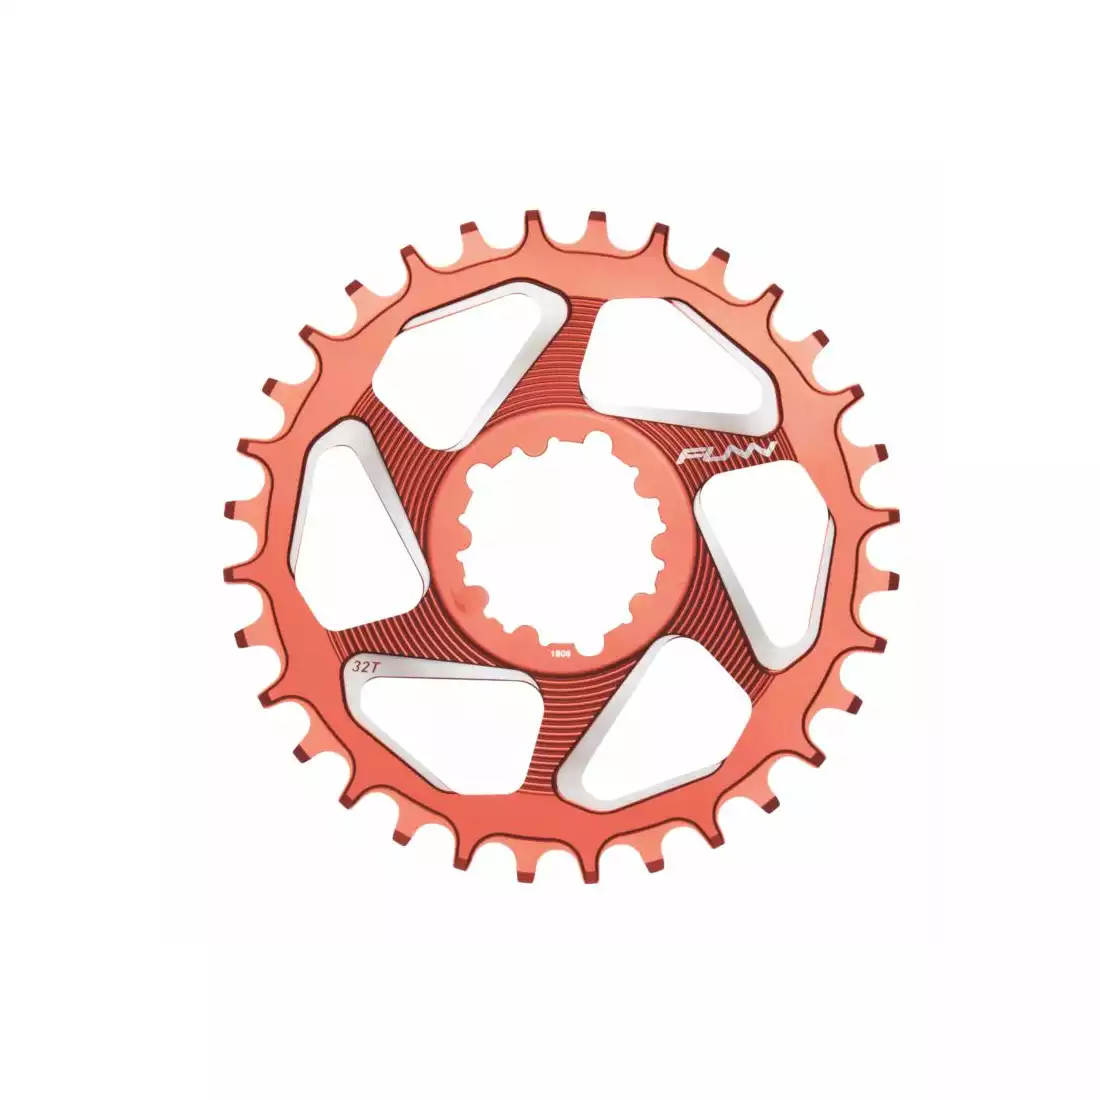 FUNN SOLO DX NARROW-WIDE BOOST 32T red sprocket for bicycle crank